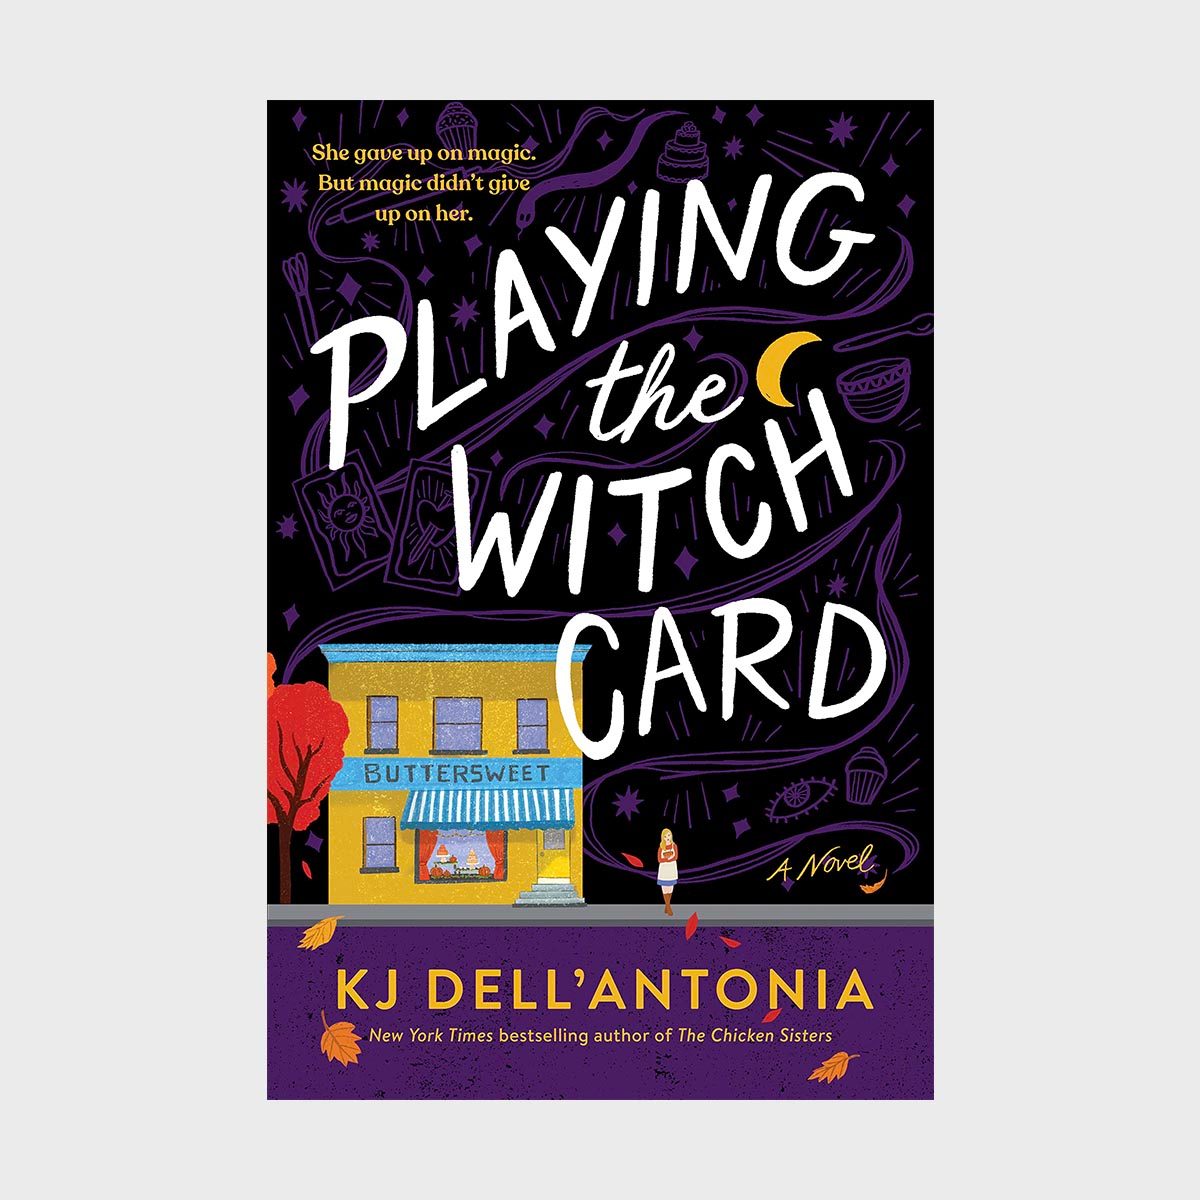 <p class=""><strong>Release date: </strong>Sept. 12, 2023</p> <p><a href="https://www.amazon.com/Playing-Witch-Card-KJ-DellAntonia/dp/0593713796/" rel="noopener noreferrer"><em>Playing the Witch Card</em></a> is billed as <em>Gilmore Girls</em> meets <em>Practical Magic</em>, which was enough to sell me! If that's not enough to hook you, know that the book continues the fine tradition of focusing on magical female-driven families. Flair Hardwicke inherits her grandmother's bakery in Kansas, and while she knows magic is real, after she finally leaves her cheating husband, she is convinced love isn't. Refusing to continue her Nana's fortune-telling side business, Flair accidentally bakes a batch of Tarot card cookies that unleashes the family's power. Chaos ensues: Her first love returns, as does her unpredictable mother and magic-obsessed daughter. Flair must confront her magical heritage to navigate the powerful new witch in town—one who isn't nearly as reluctant or careful with her powers. I can't wait to read this <a href="https://www.rd.com/list/fantasy-romance-books/" rel="noopener noreferrer">fantasy romance book</a> while sitting outside on my porch watching the crisp leaves fall.</p> <p class="listicle-page__cta-button-shop"><a class="shop-btn" href="https://www.amazon.com/Playing-Witch-Card-KJ-DellAntonia/dp/0593713796/">Shop Now</a></p>